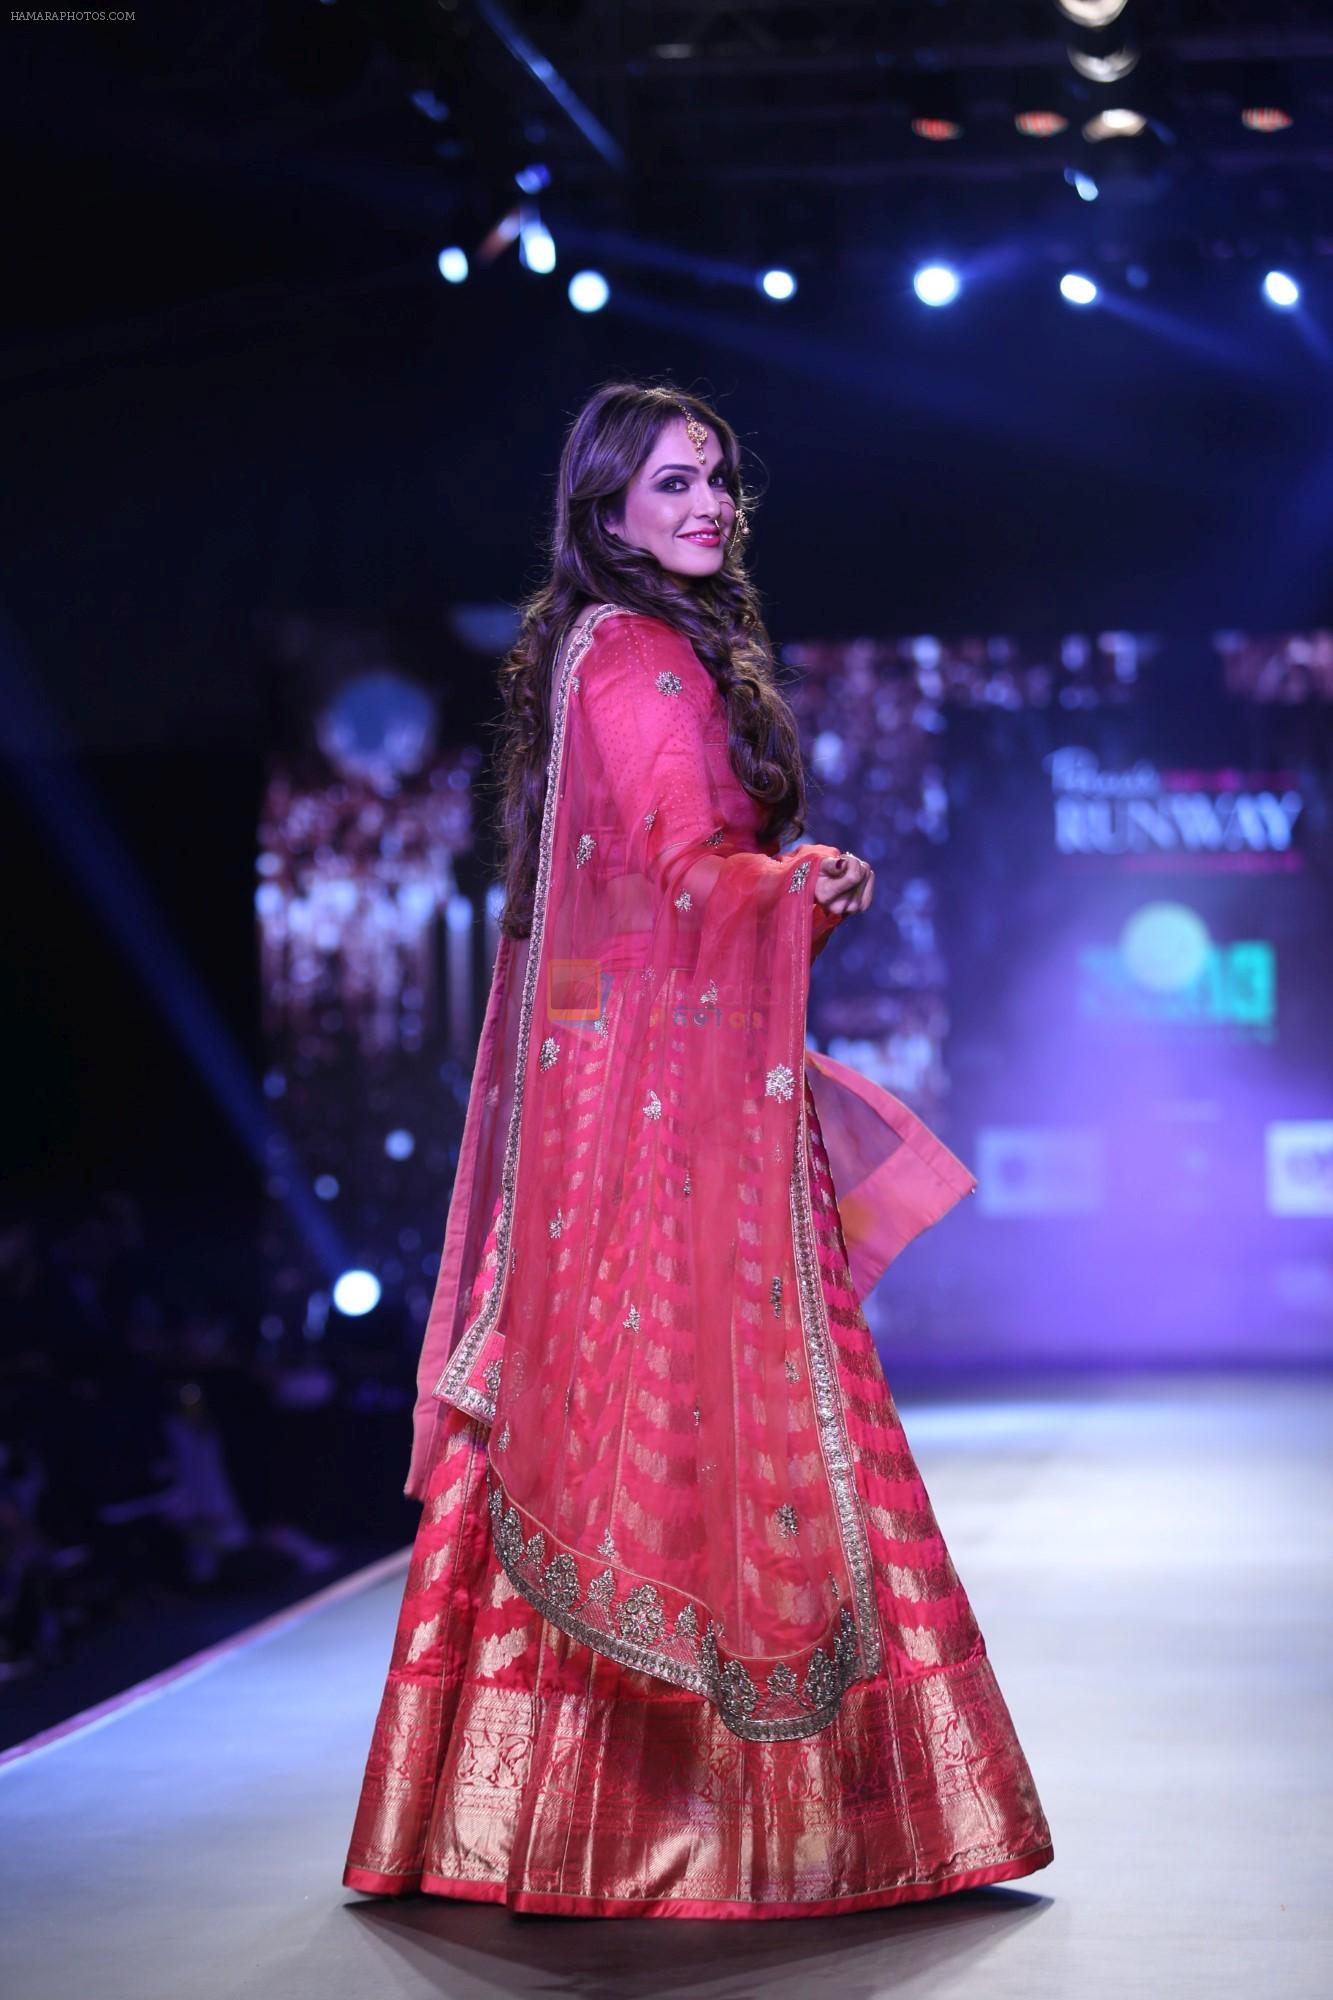 Isha Koppikar at Smile Foundation & Designer Sailesh Singhania fashion show for the 13th edition of Ramp for Champs at the race course in mahalxmi on 13th Feb 2019